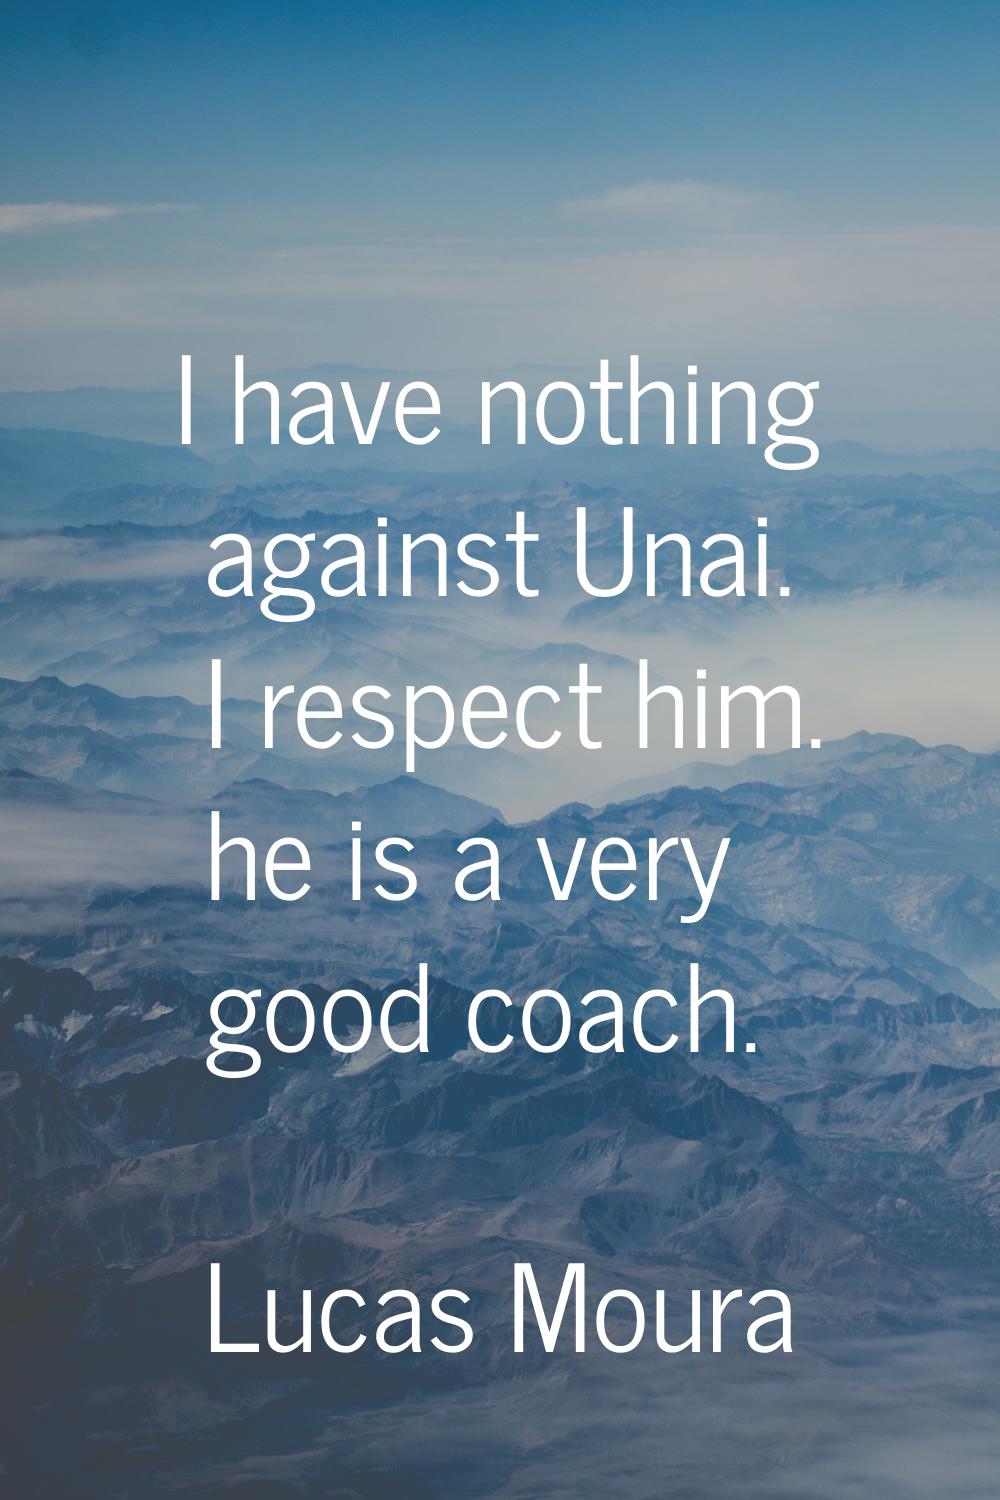 I have nothing against Unai. I respect him. he is a very good coach.